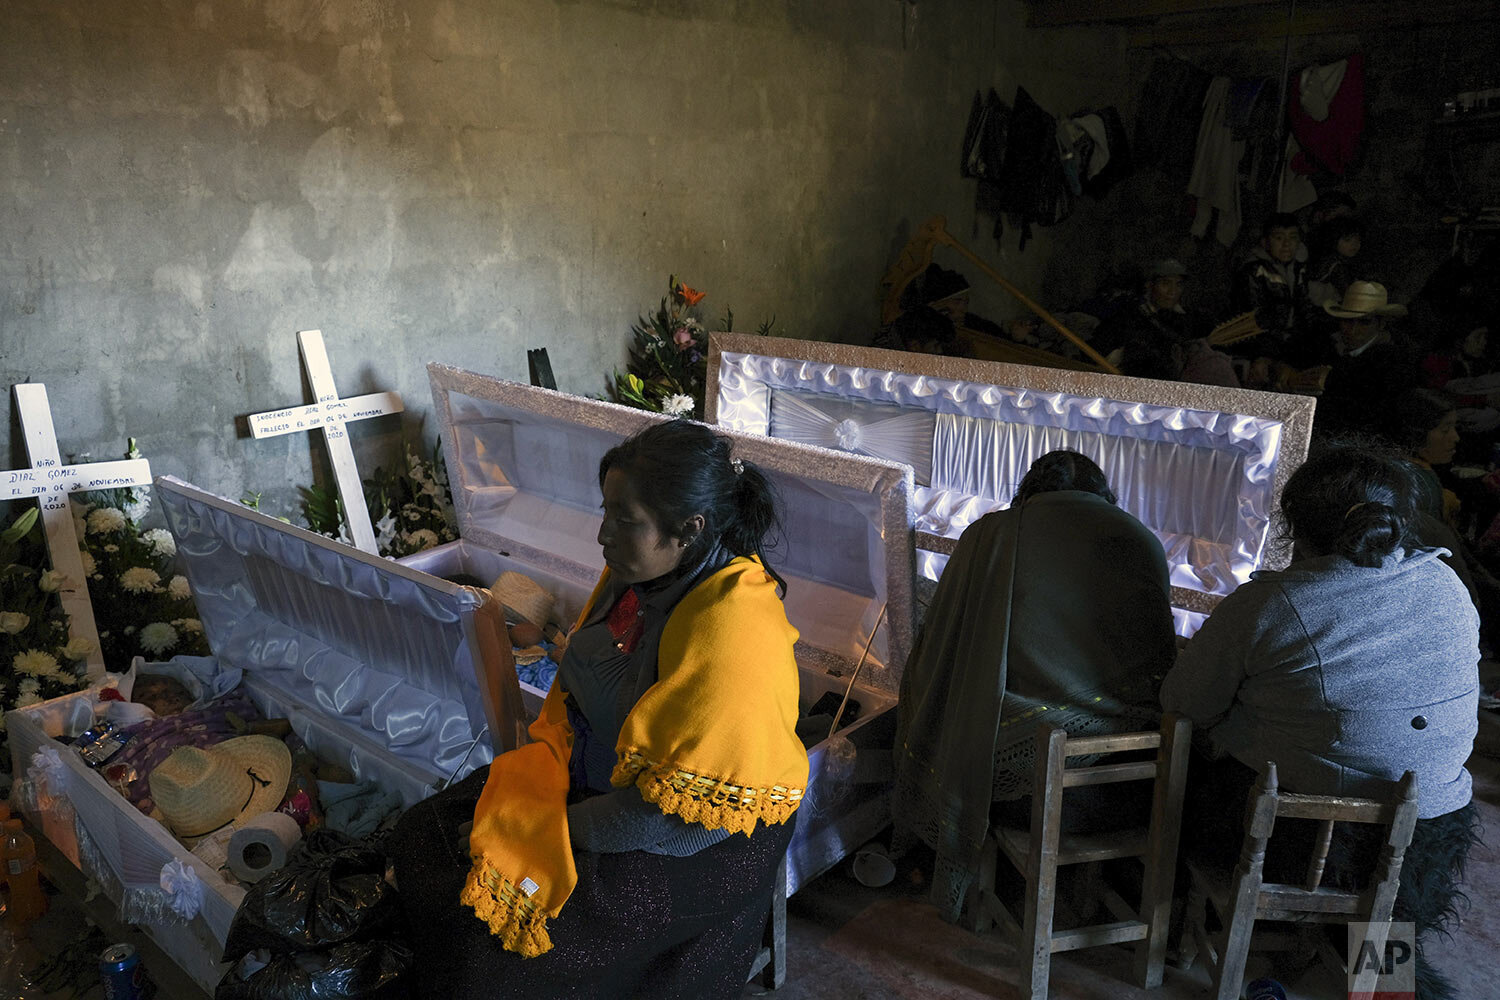  Mourners attend the wake of four members of a family who died when their home was washed away by flash floods in Mukem, Chiapas state, Mexico, Monday, Nov. 9, 2020.   (AP Photo/Isabel Mateos) 